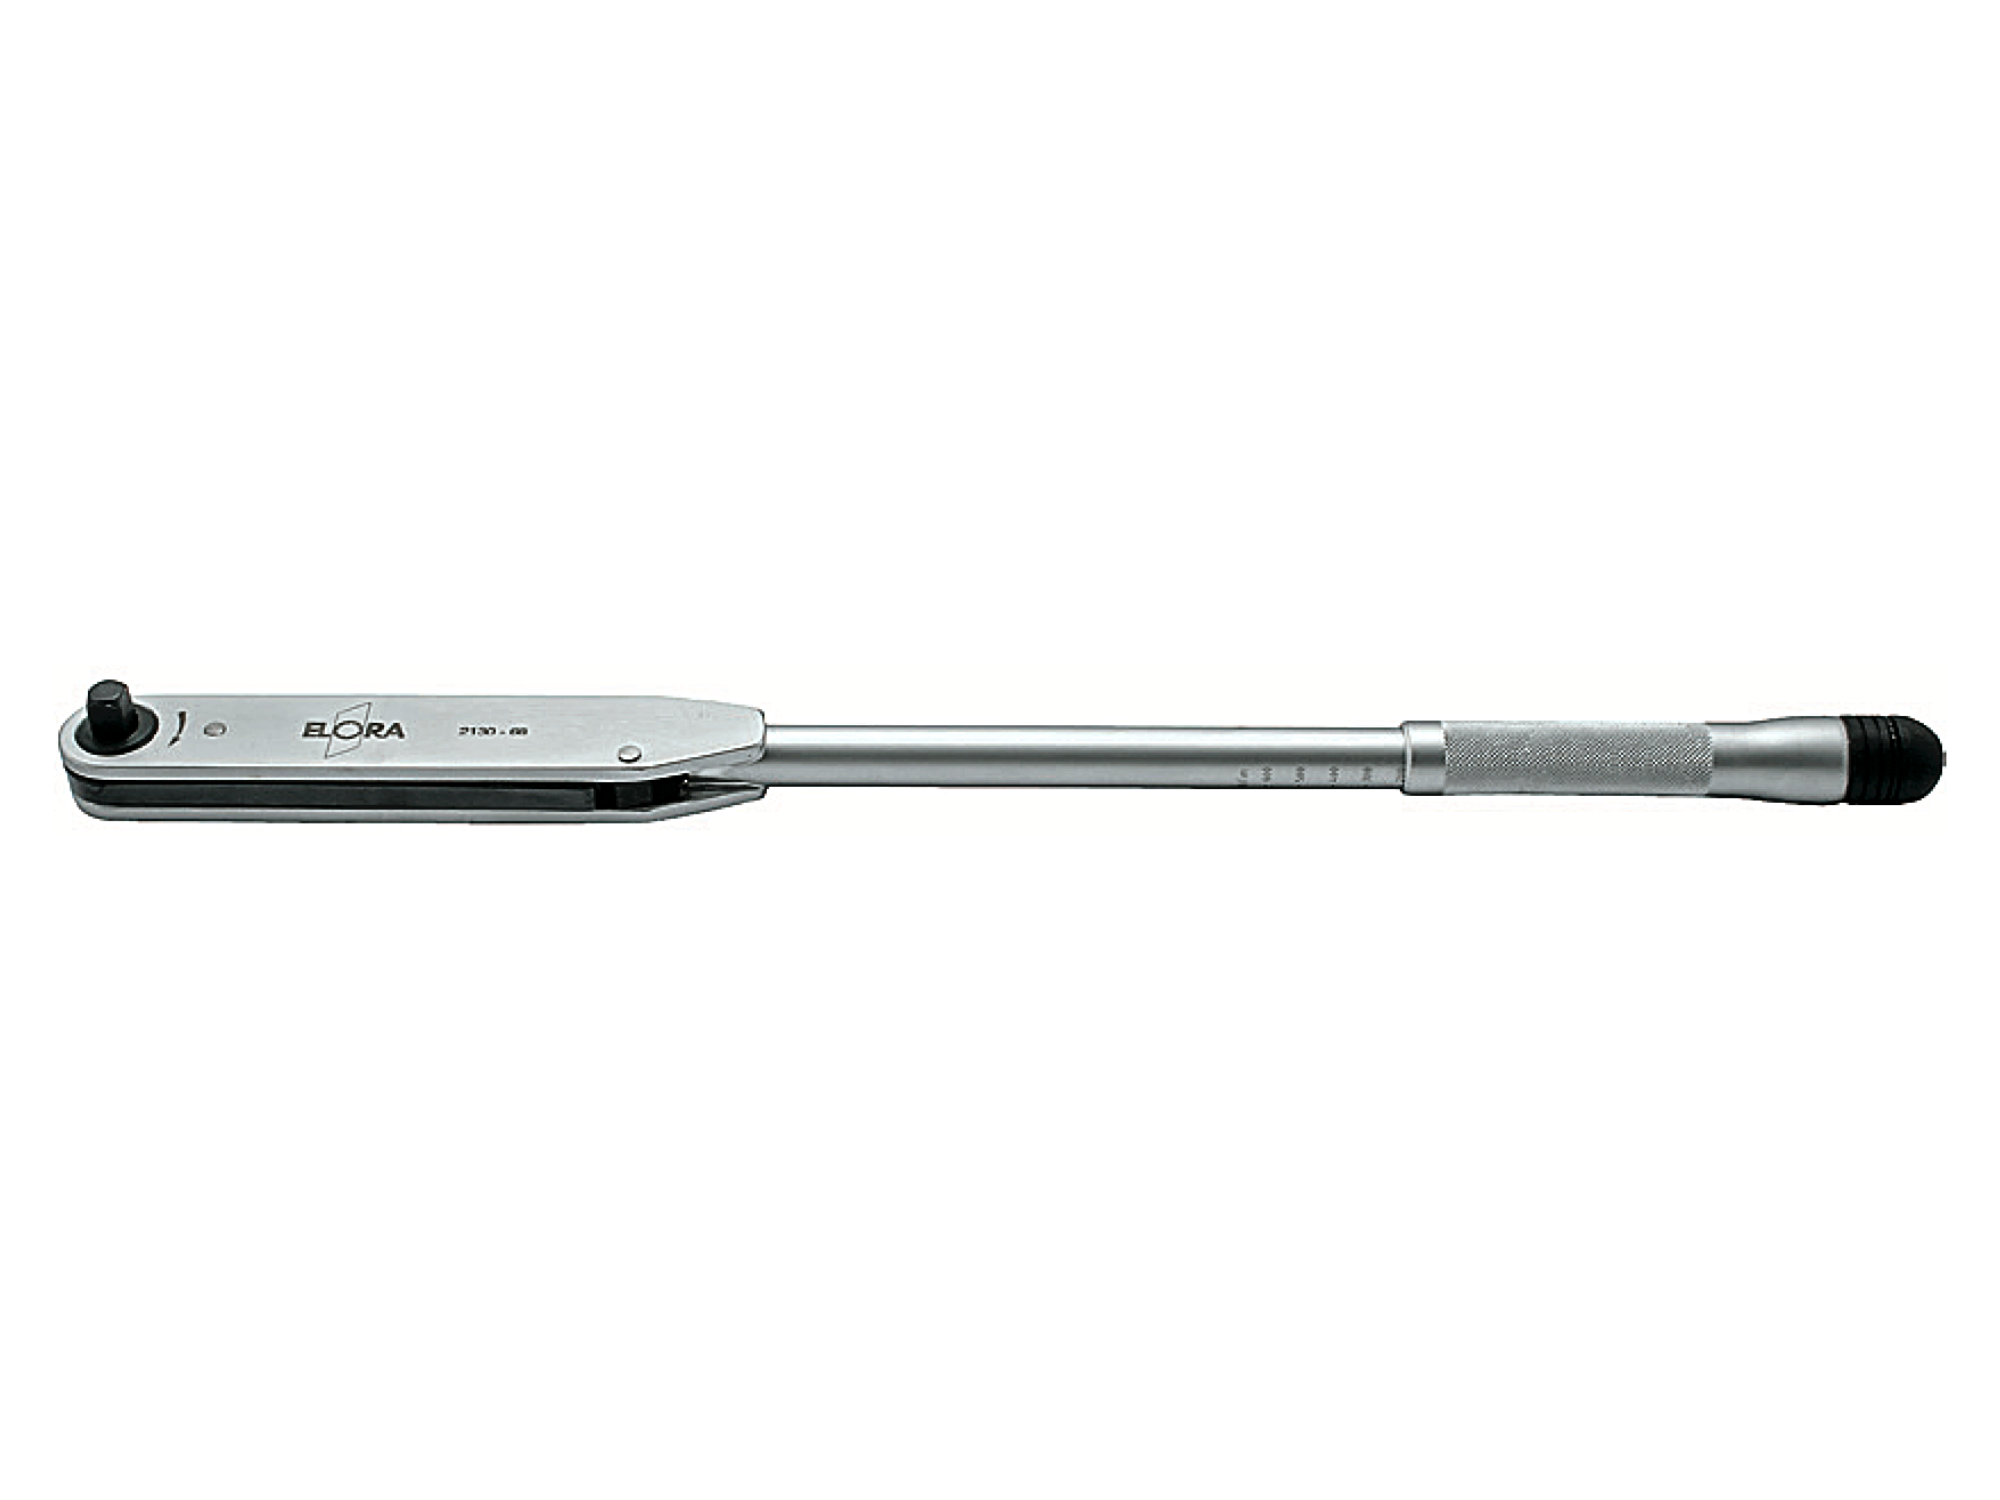 ELORA 2150-810 3/4" Torque Wrench (ELORA Tools) - Premium 3/4" Torque Wrench from ELORA - Shop now at Yew Aik.